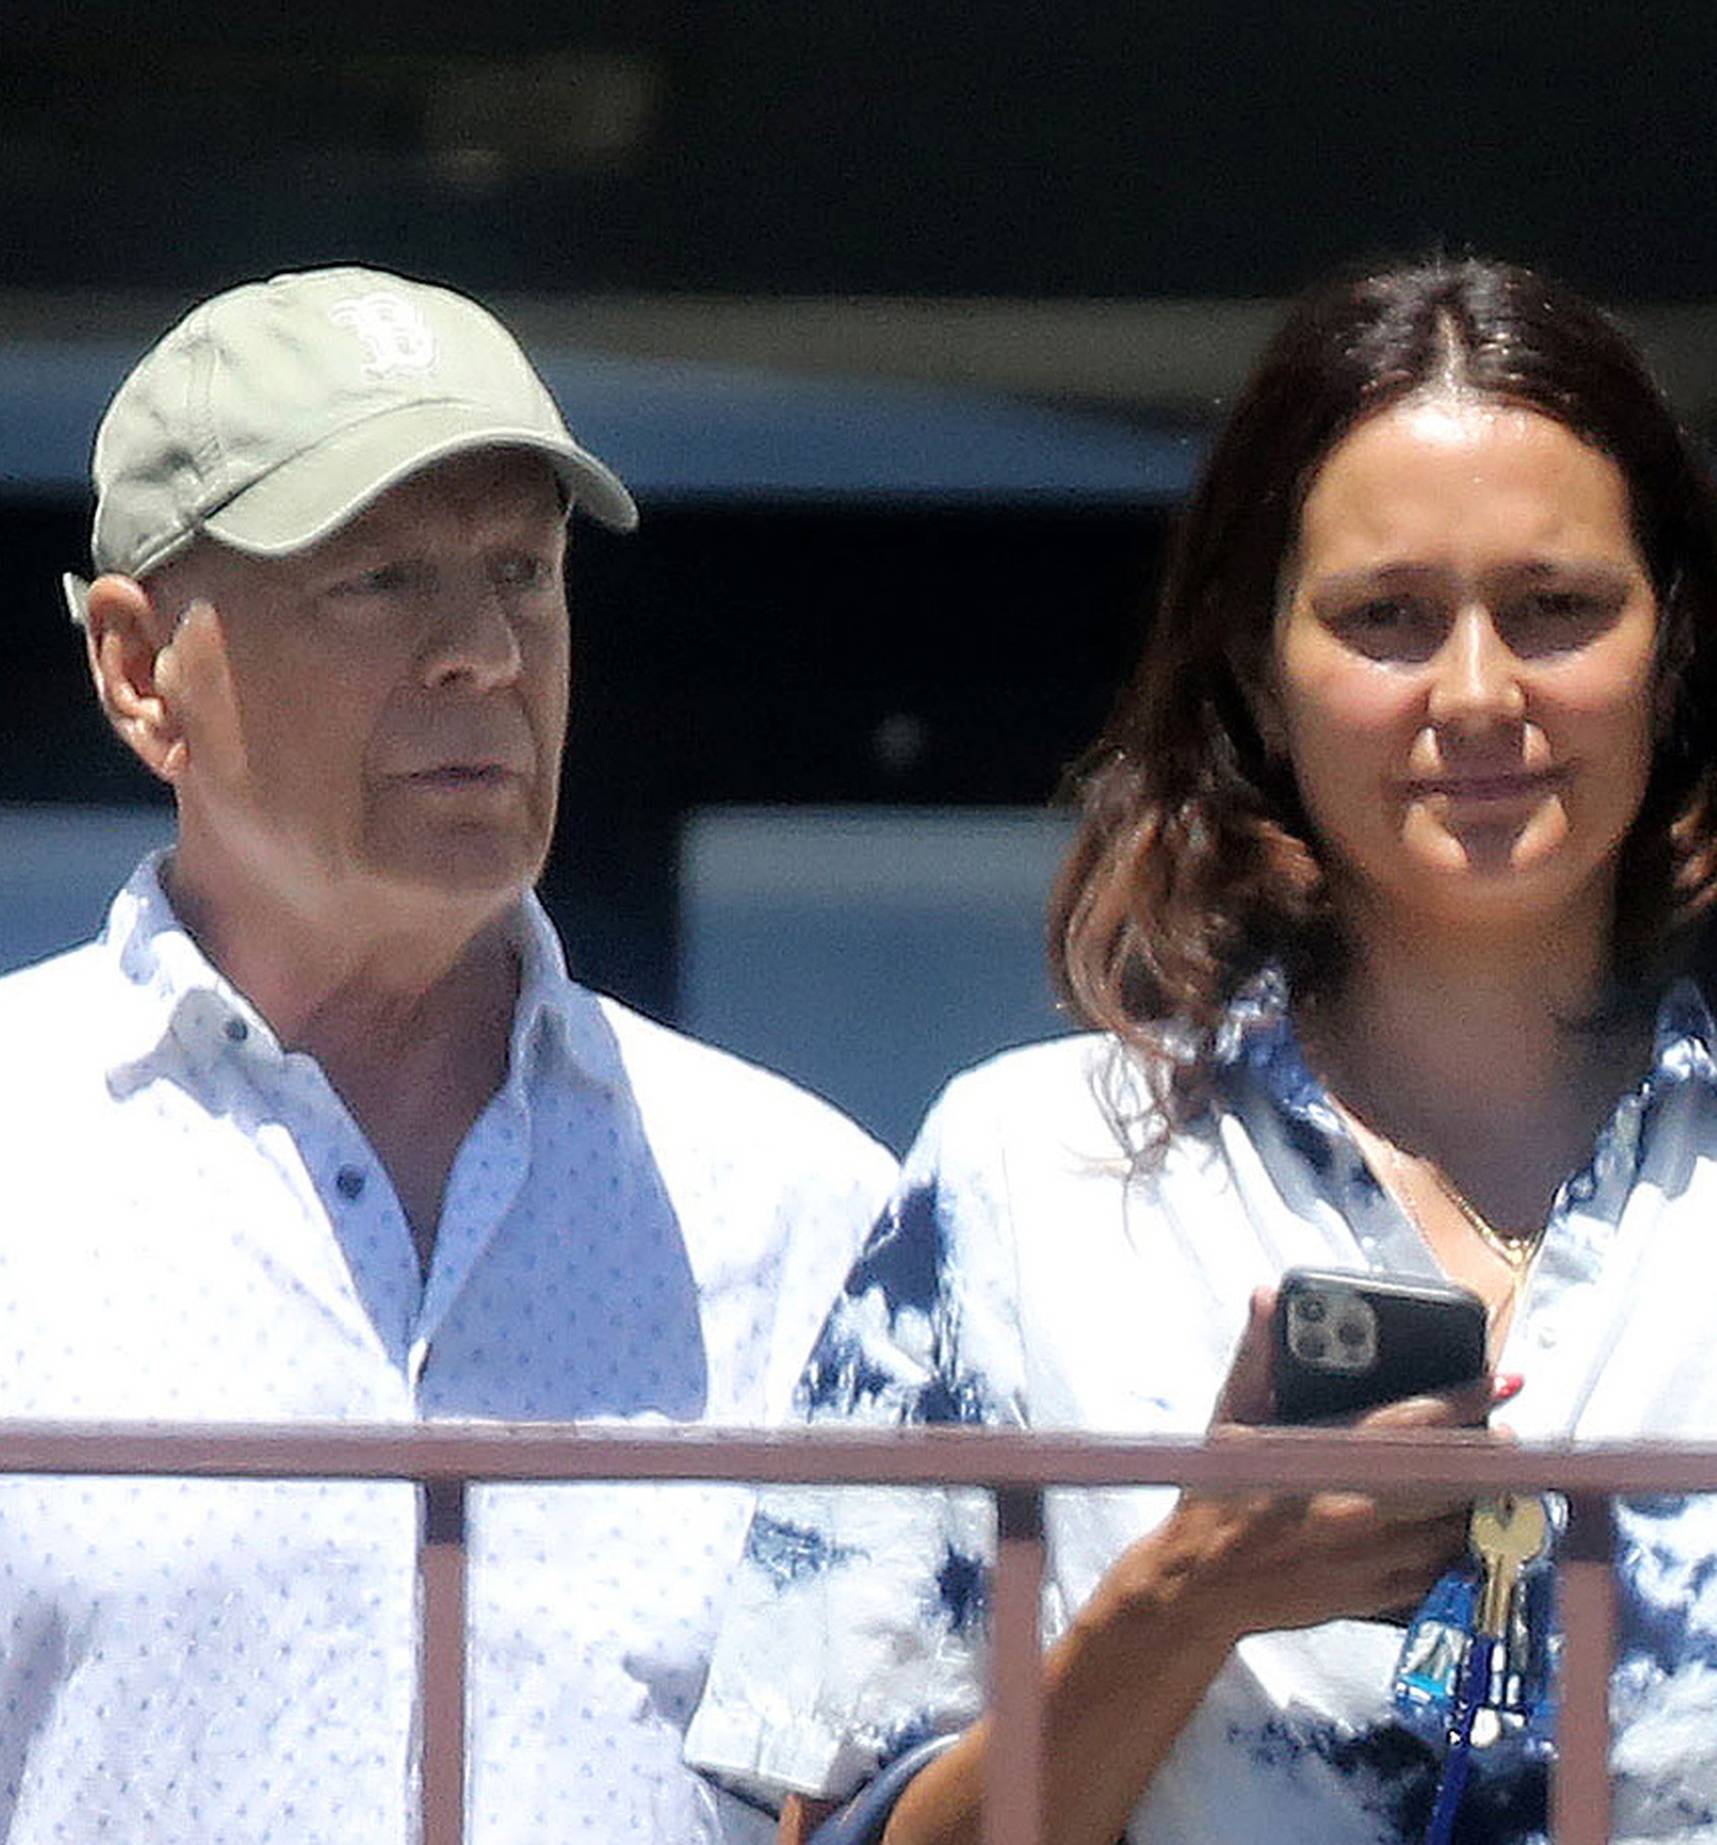 EXCLUSIVE: Bruce Willis and His Wife Emma Heming Step Out to Run Errands in Los Angeles